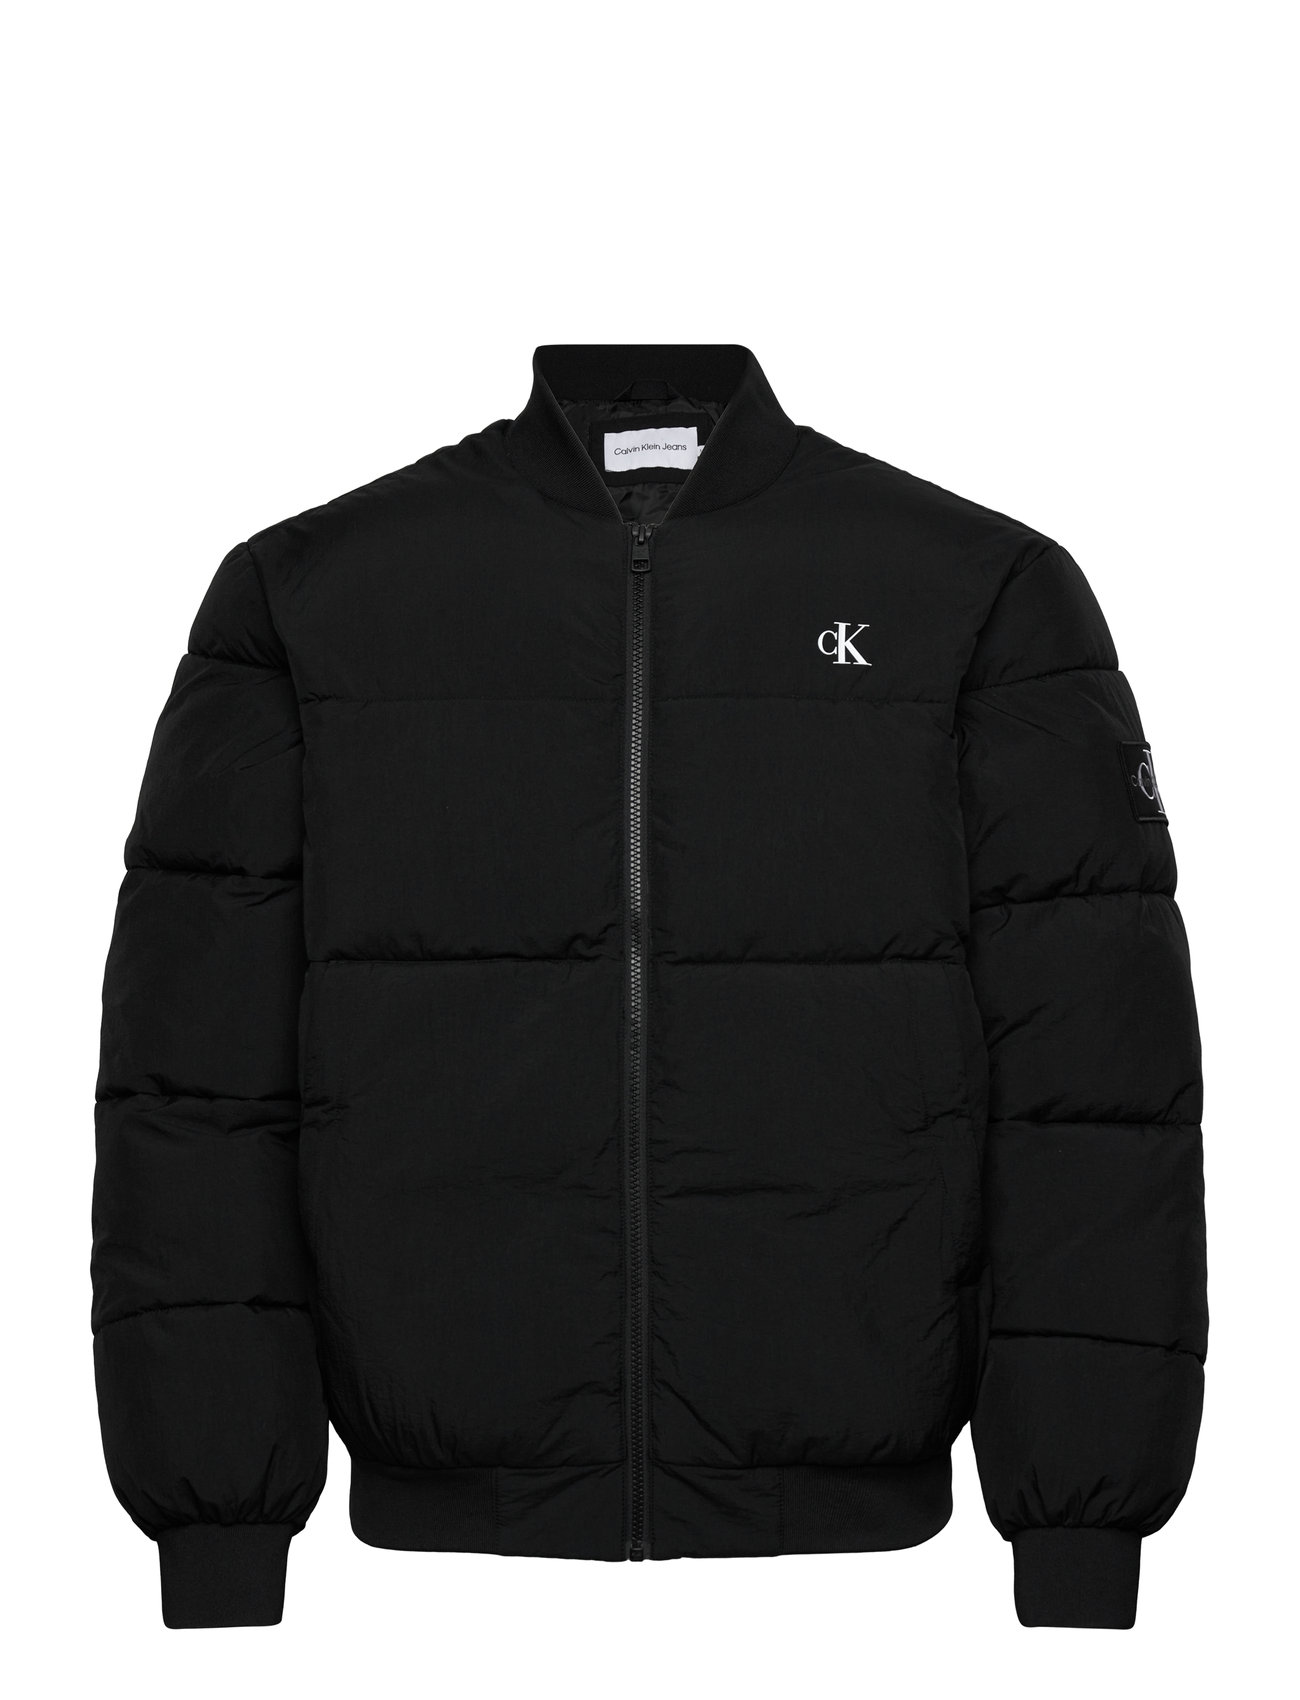 Calvin Klein Jeans Commercial Bomber Jacket - 99.95 €. Buy Bomber Jackets  from Calvin Klein Jeans online at Boozt.com. Fast delivery and easy returns